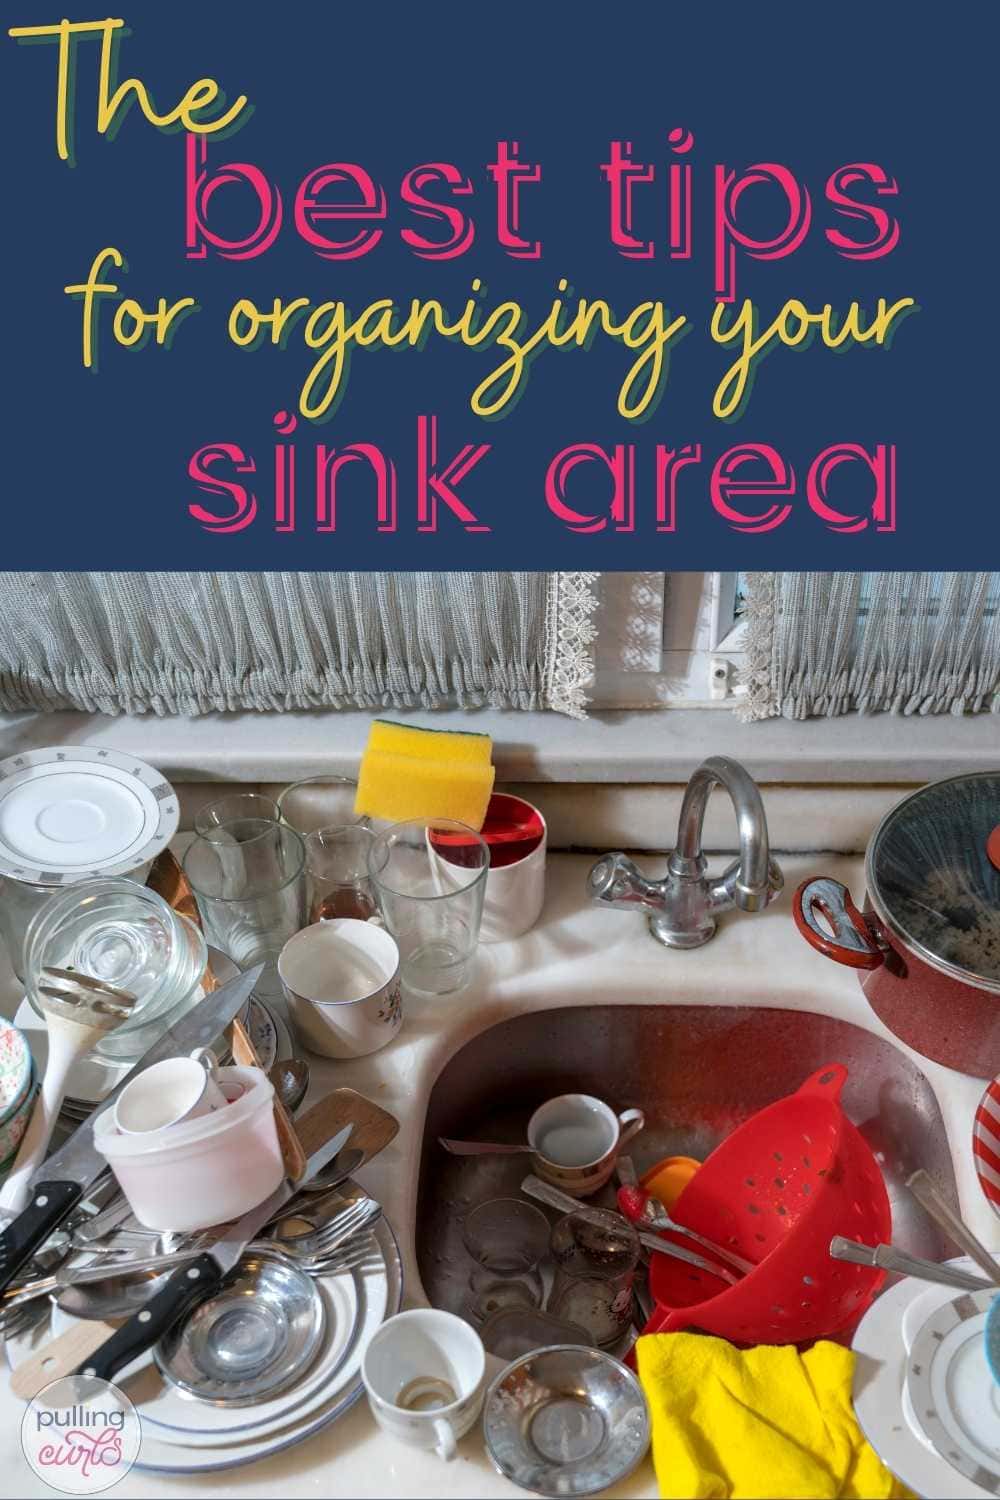 How to Wash Dishes: Practical Tips for an Ultimate Clean